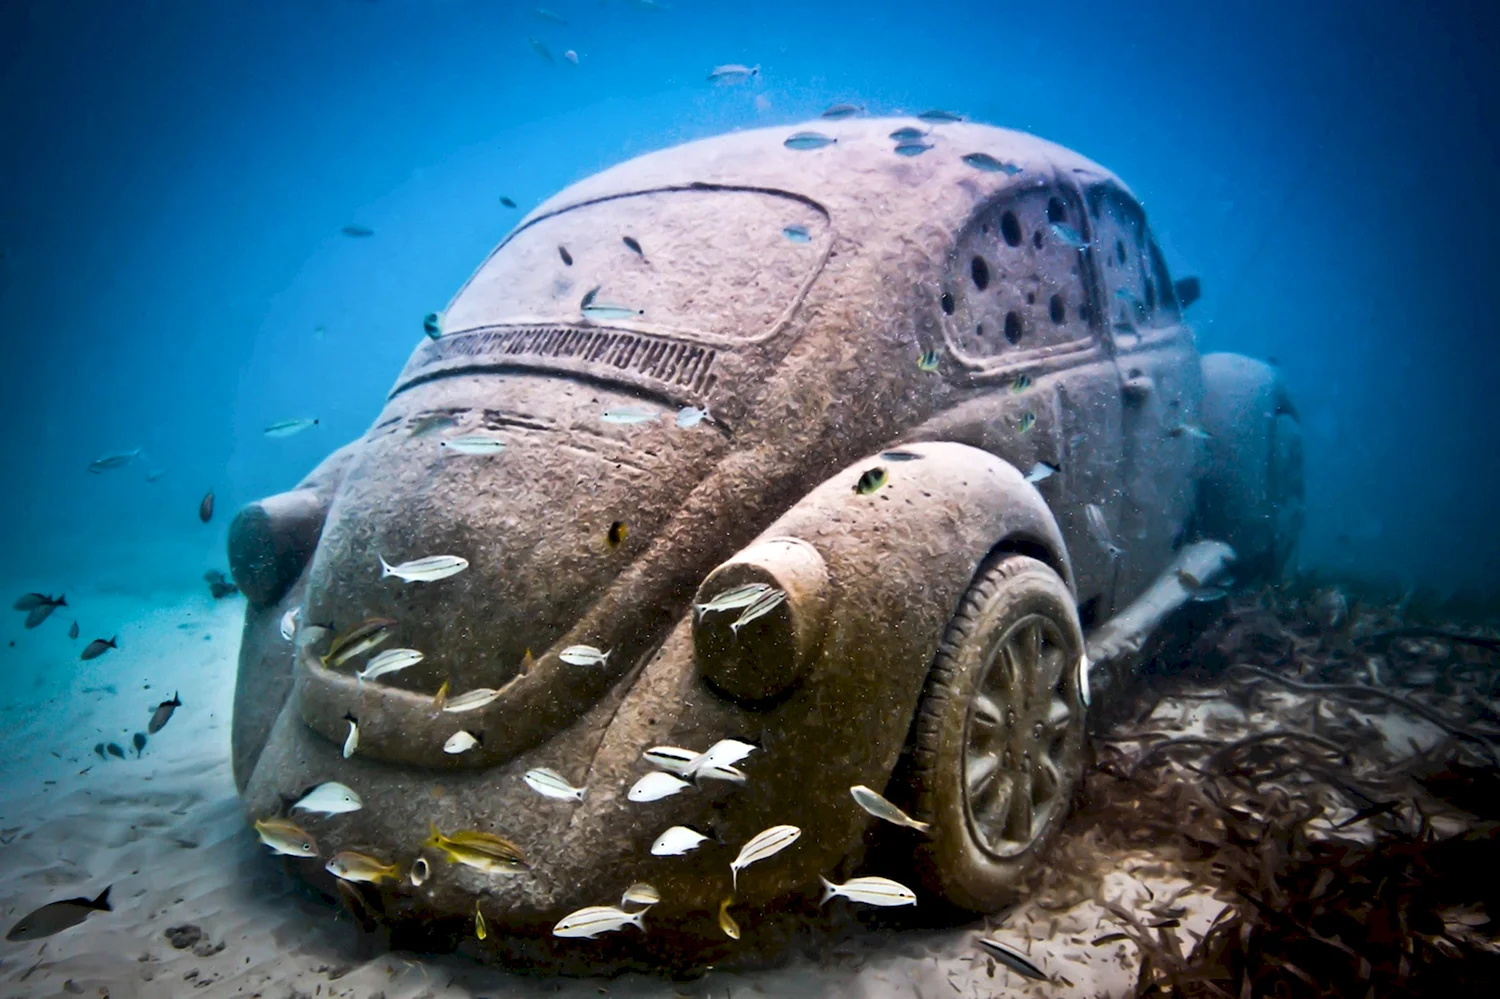 Volkswagen Beetle by Jason DECAIRES Taylor